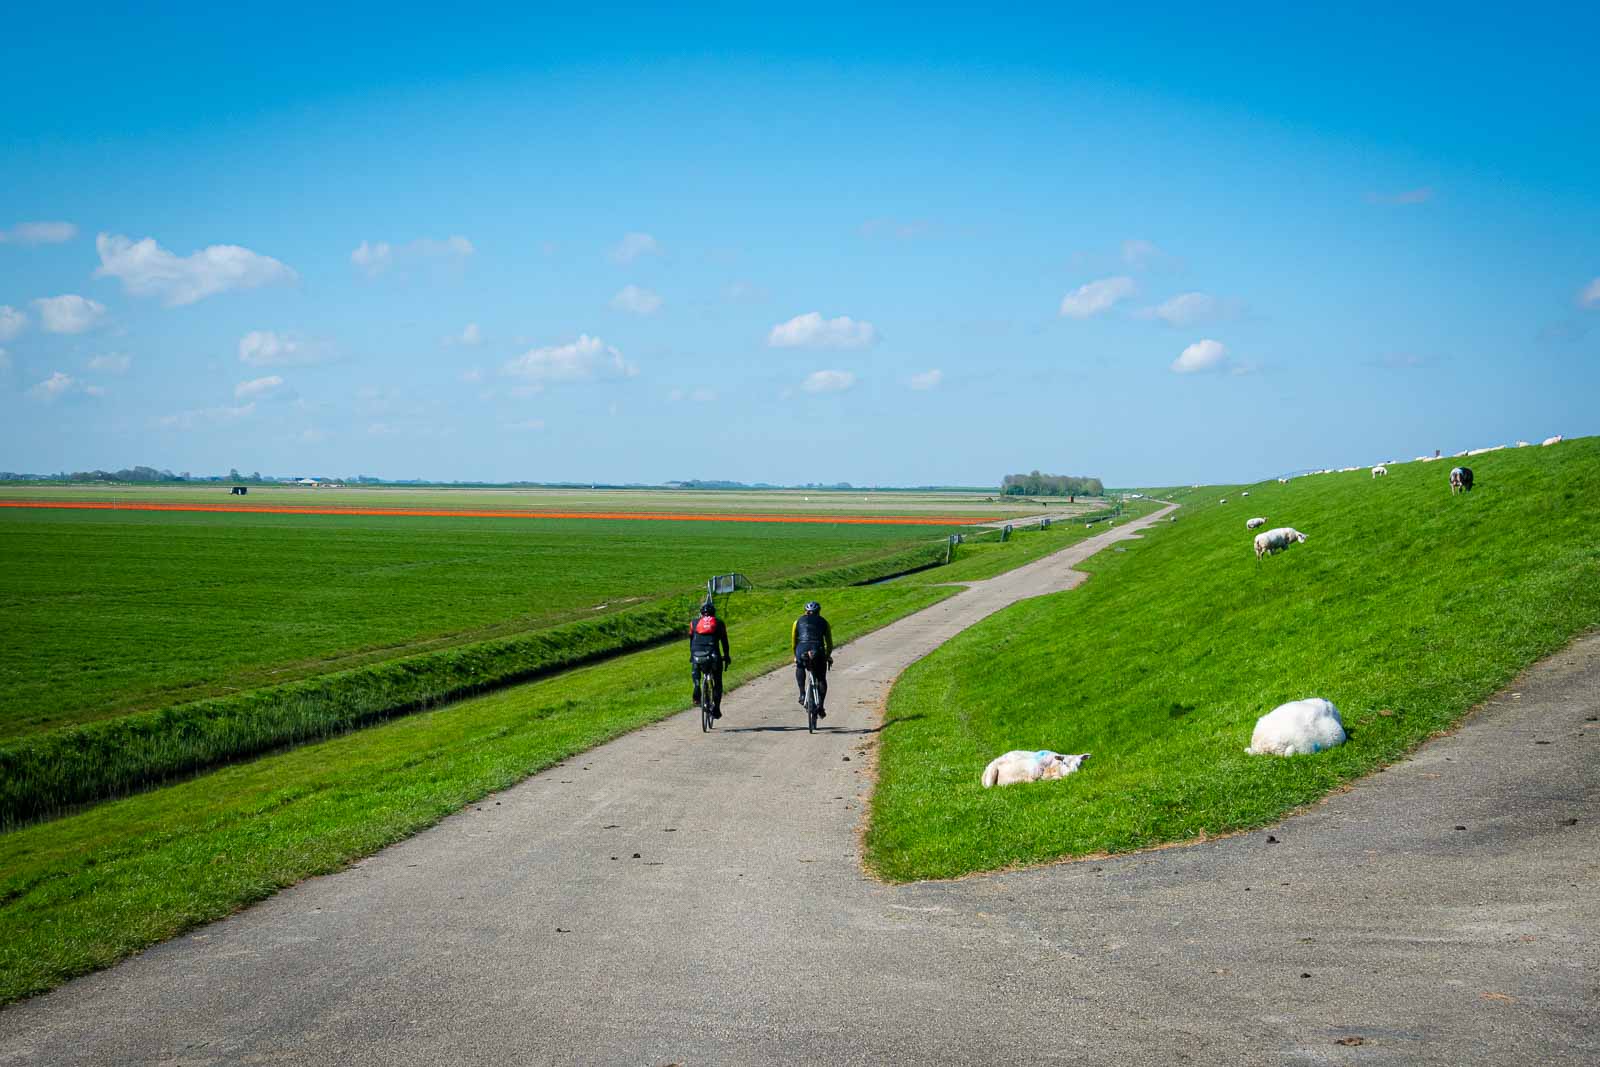 Two cyclists from behind riding along a dike with sheep and taking part in the ultra-cycling event Race around the Netherlands